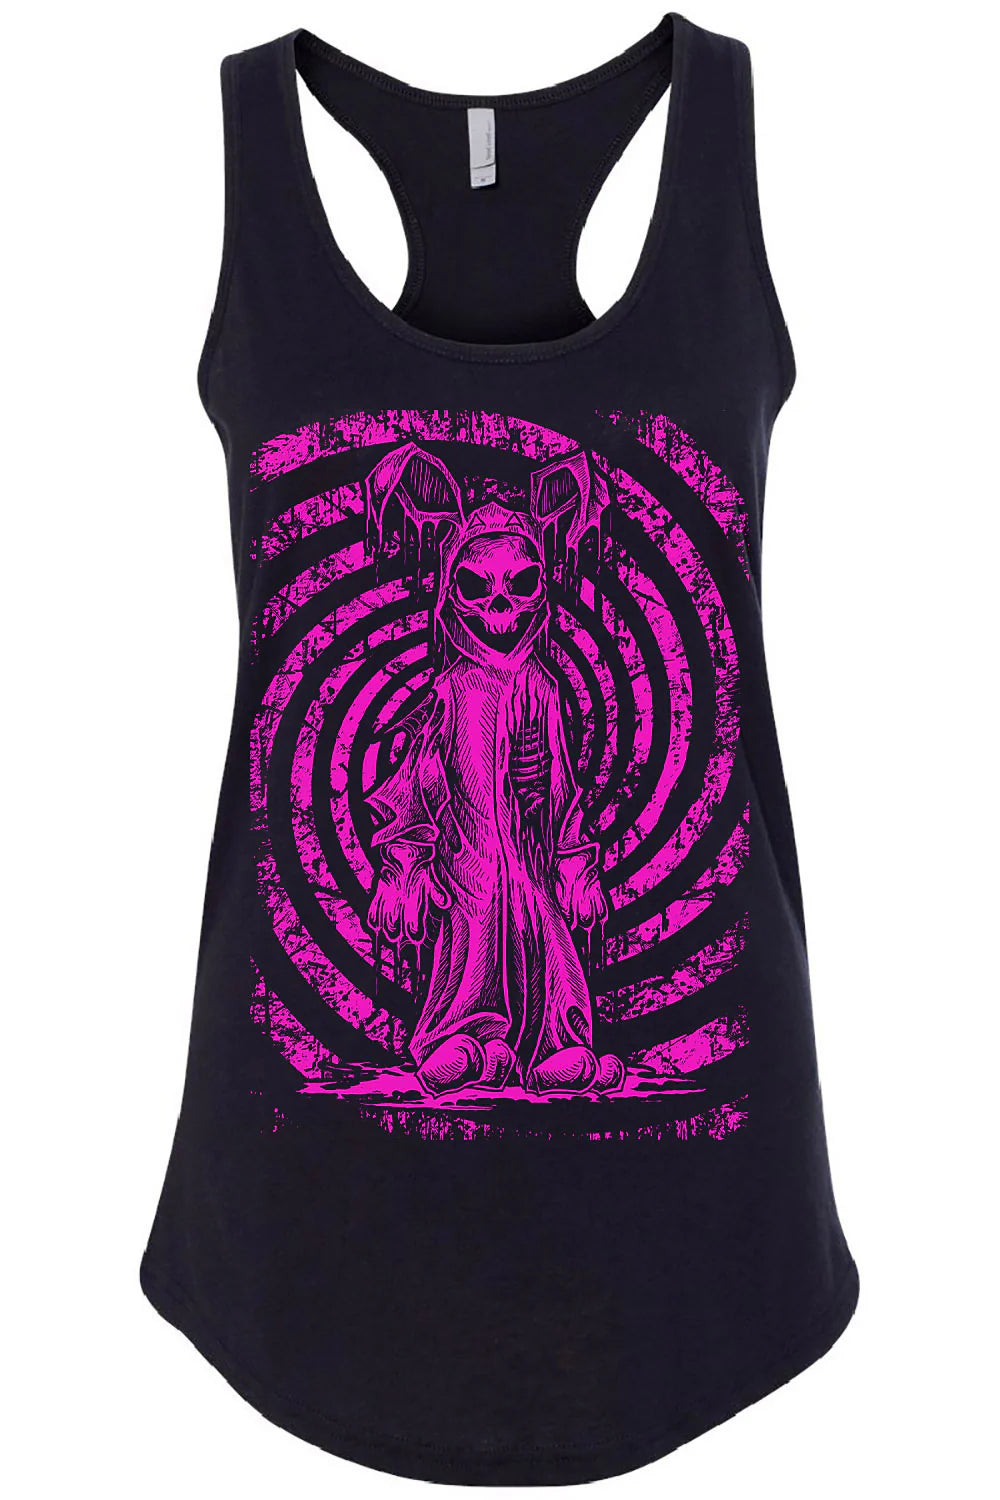 Camisole Death Rave Bunny